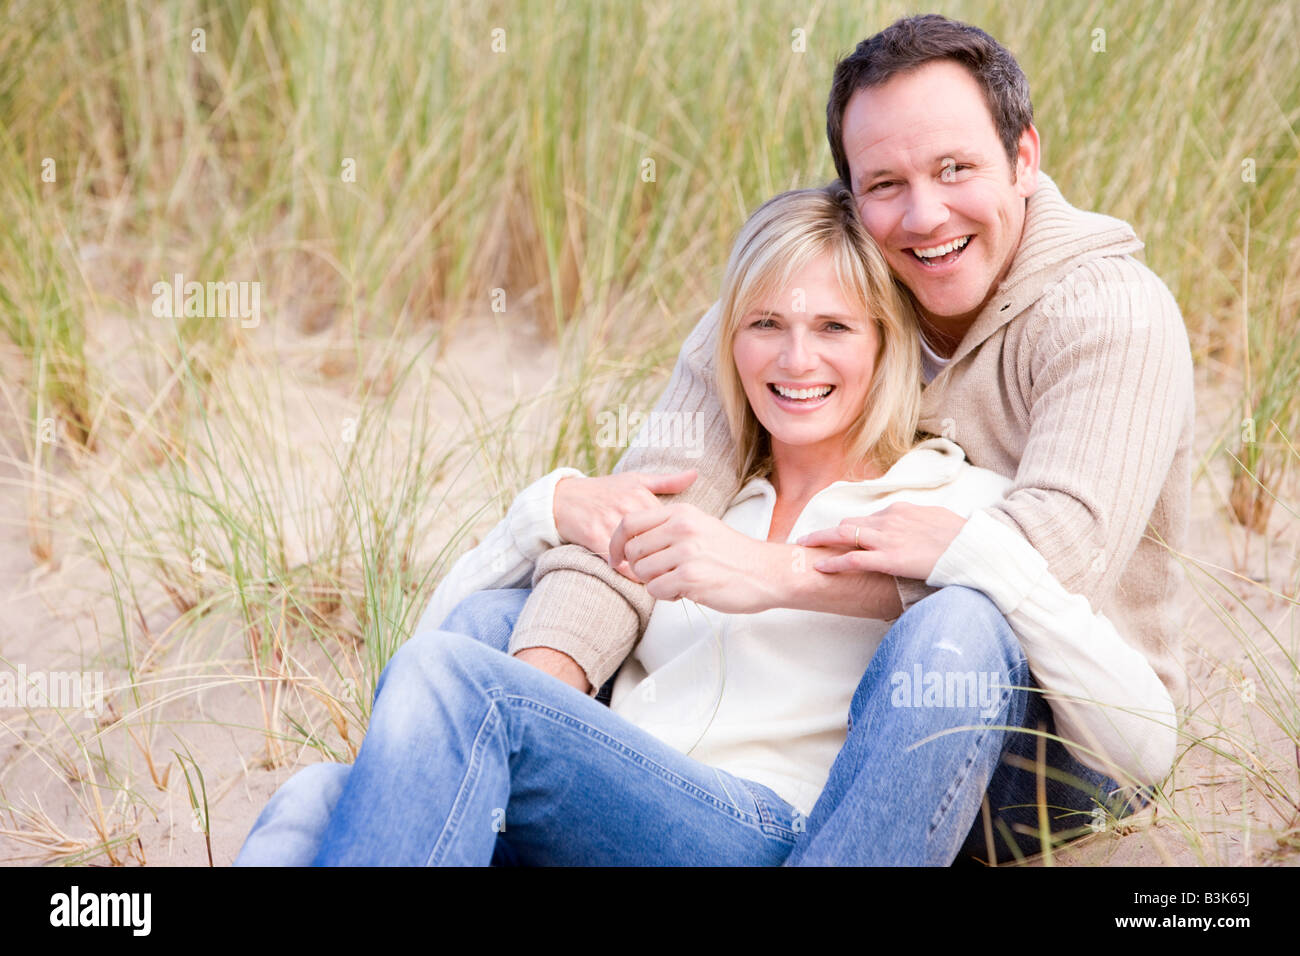 Couple sitting on beach smiling Banque D'Images